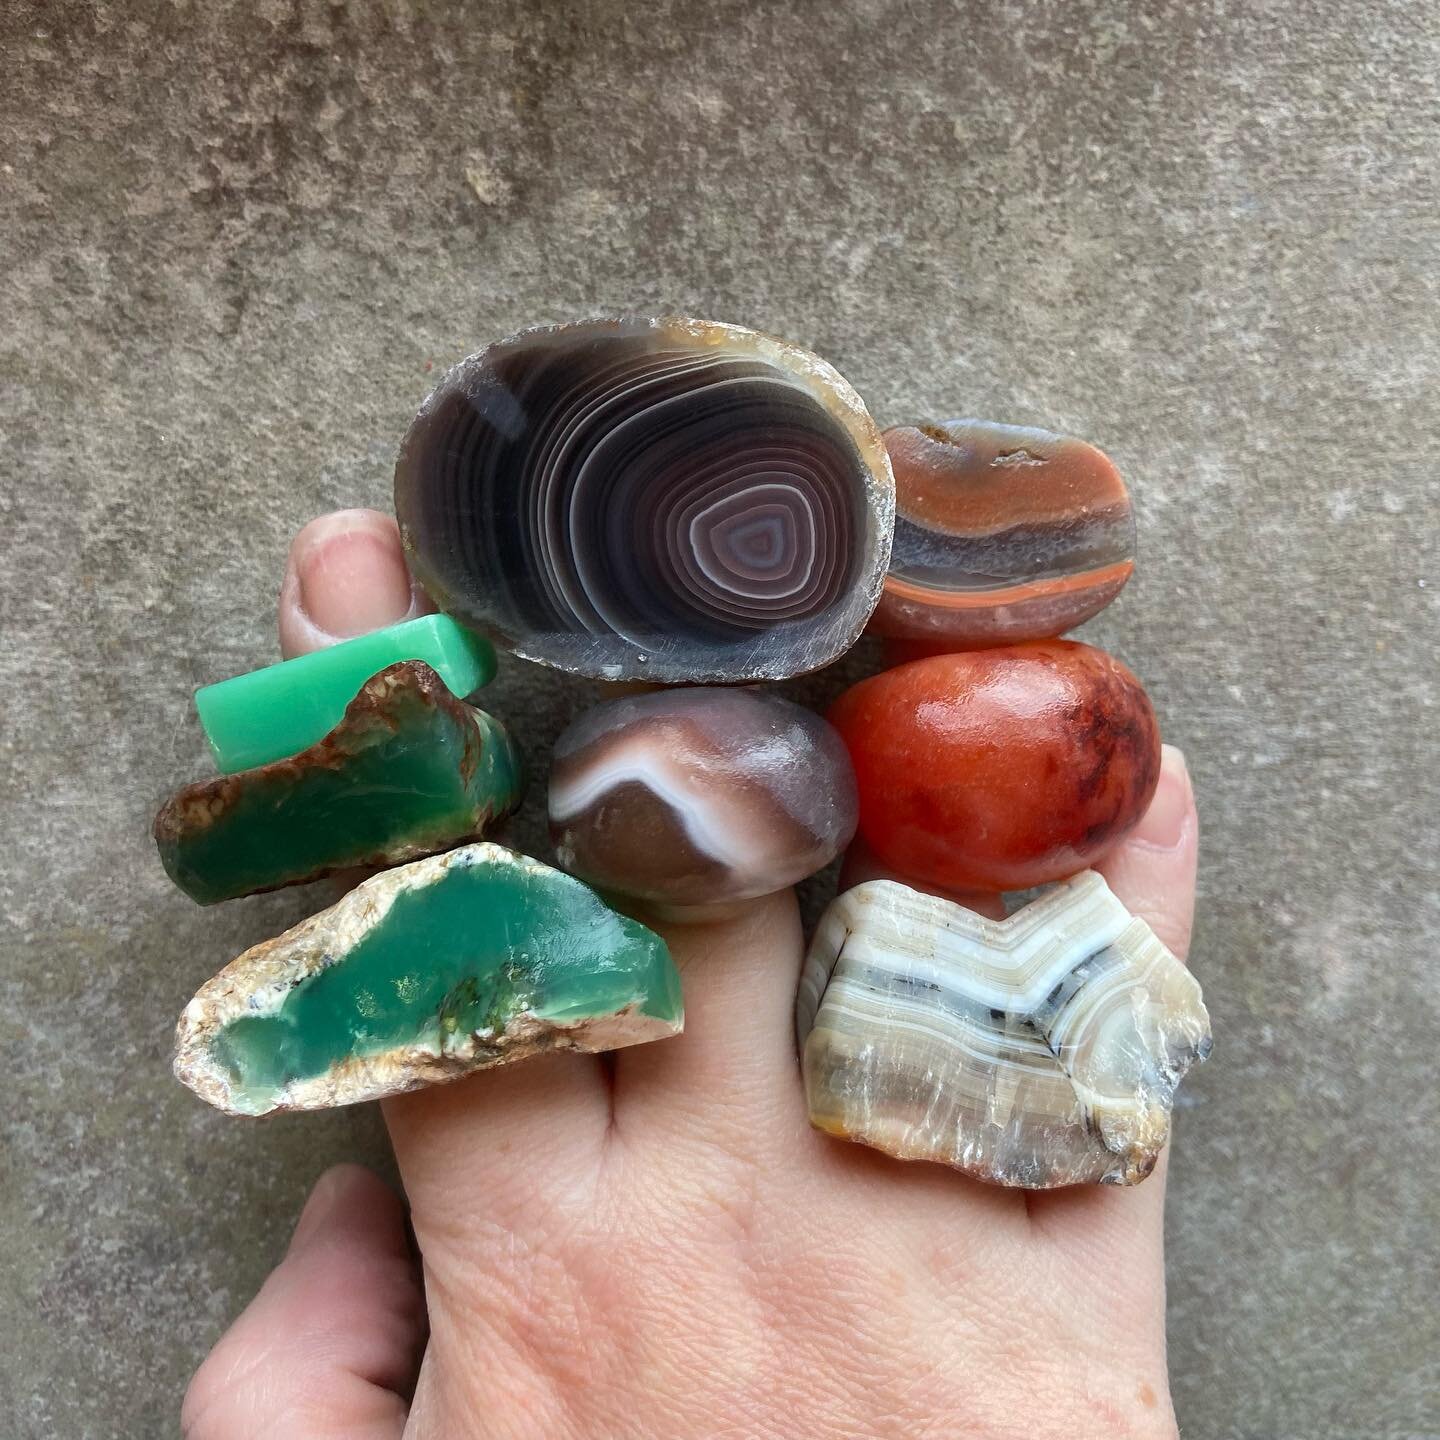 Tumbler time! I got my first batch of 2023 rings in the tumbler yesterday. Mostly agates and chrysoprase but there are a few other treats in there too 😉 I&rsquo;m learning to lean into the pace of the rings, they take so much time and patience to be